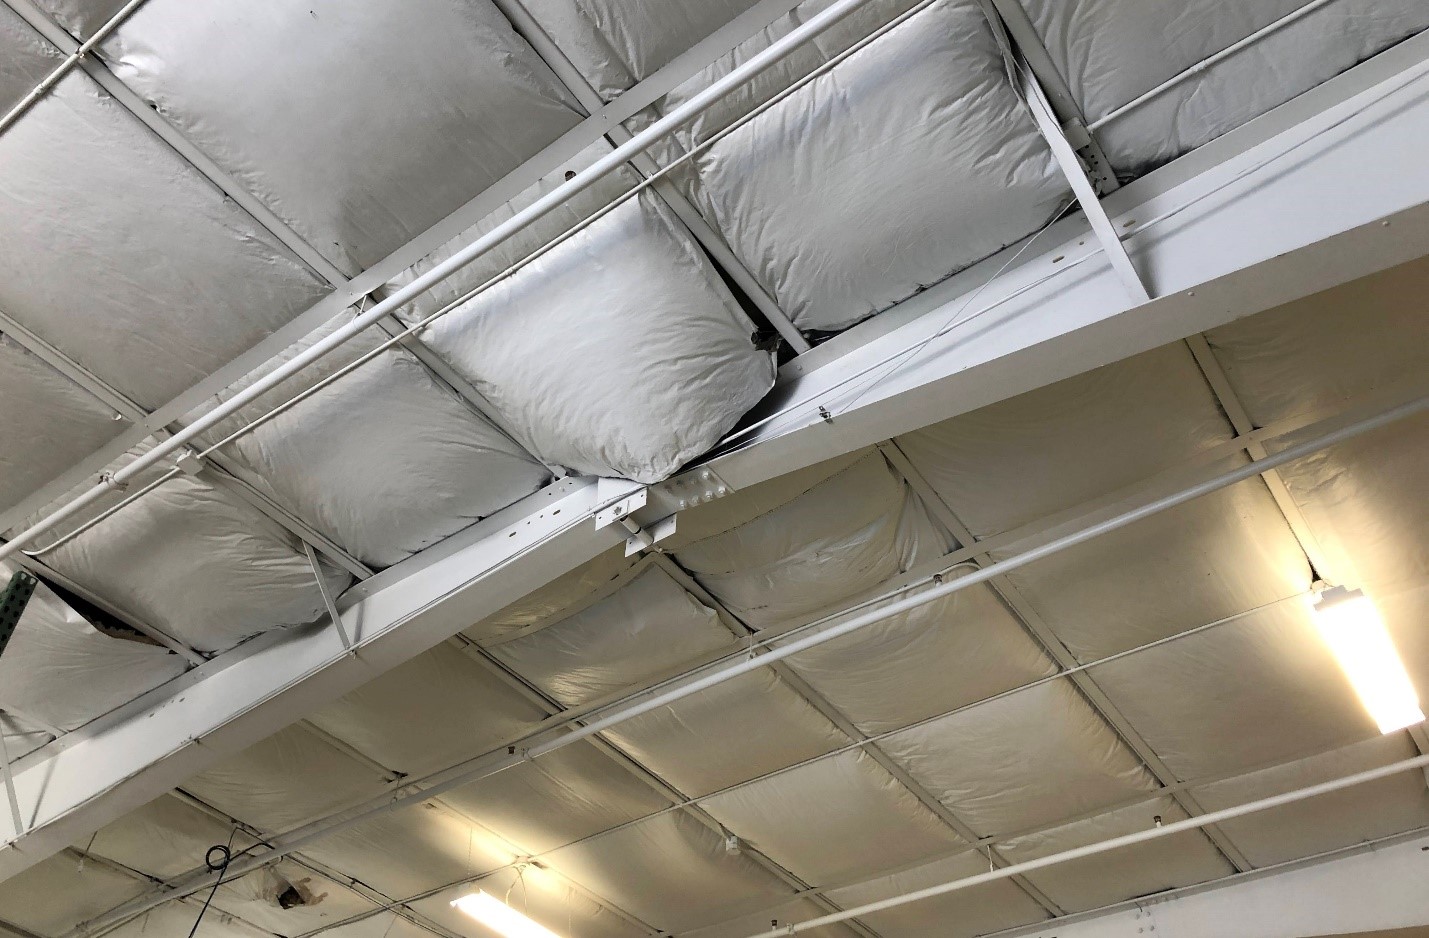 Wet insulation sagging from ceiling